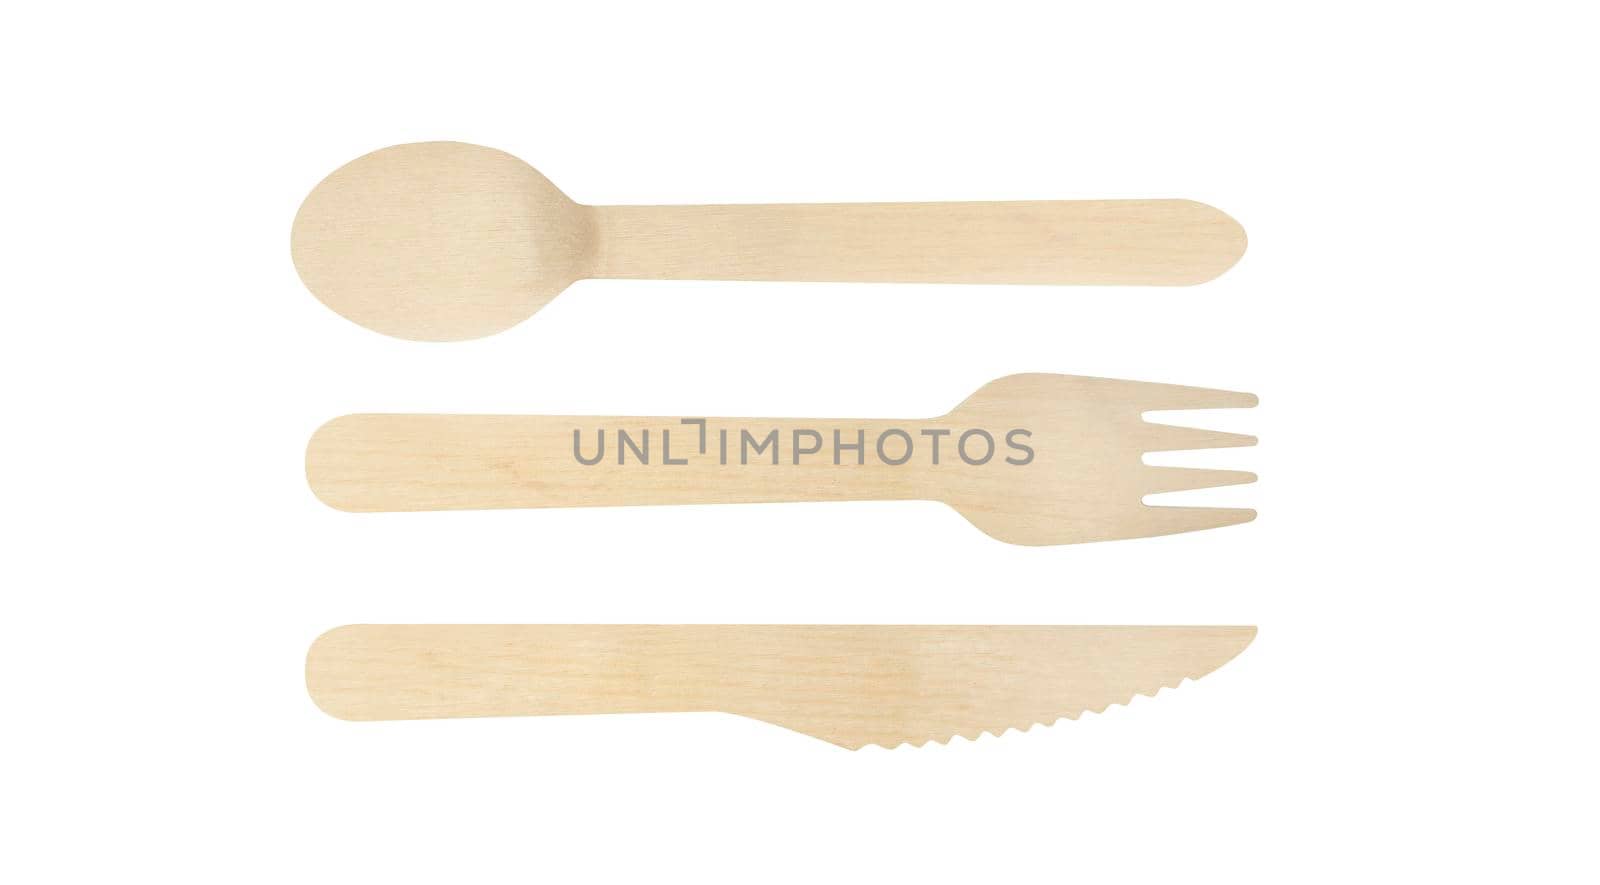 Wooden spoon, fork and knife isolated on white background by SlayCer